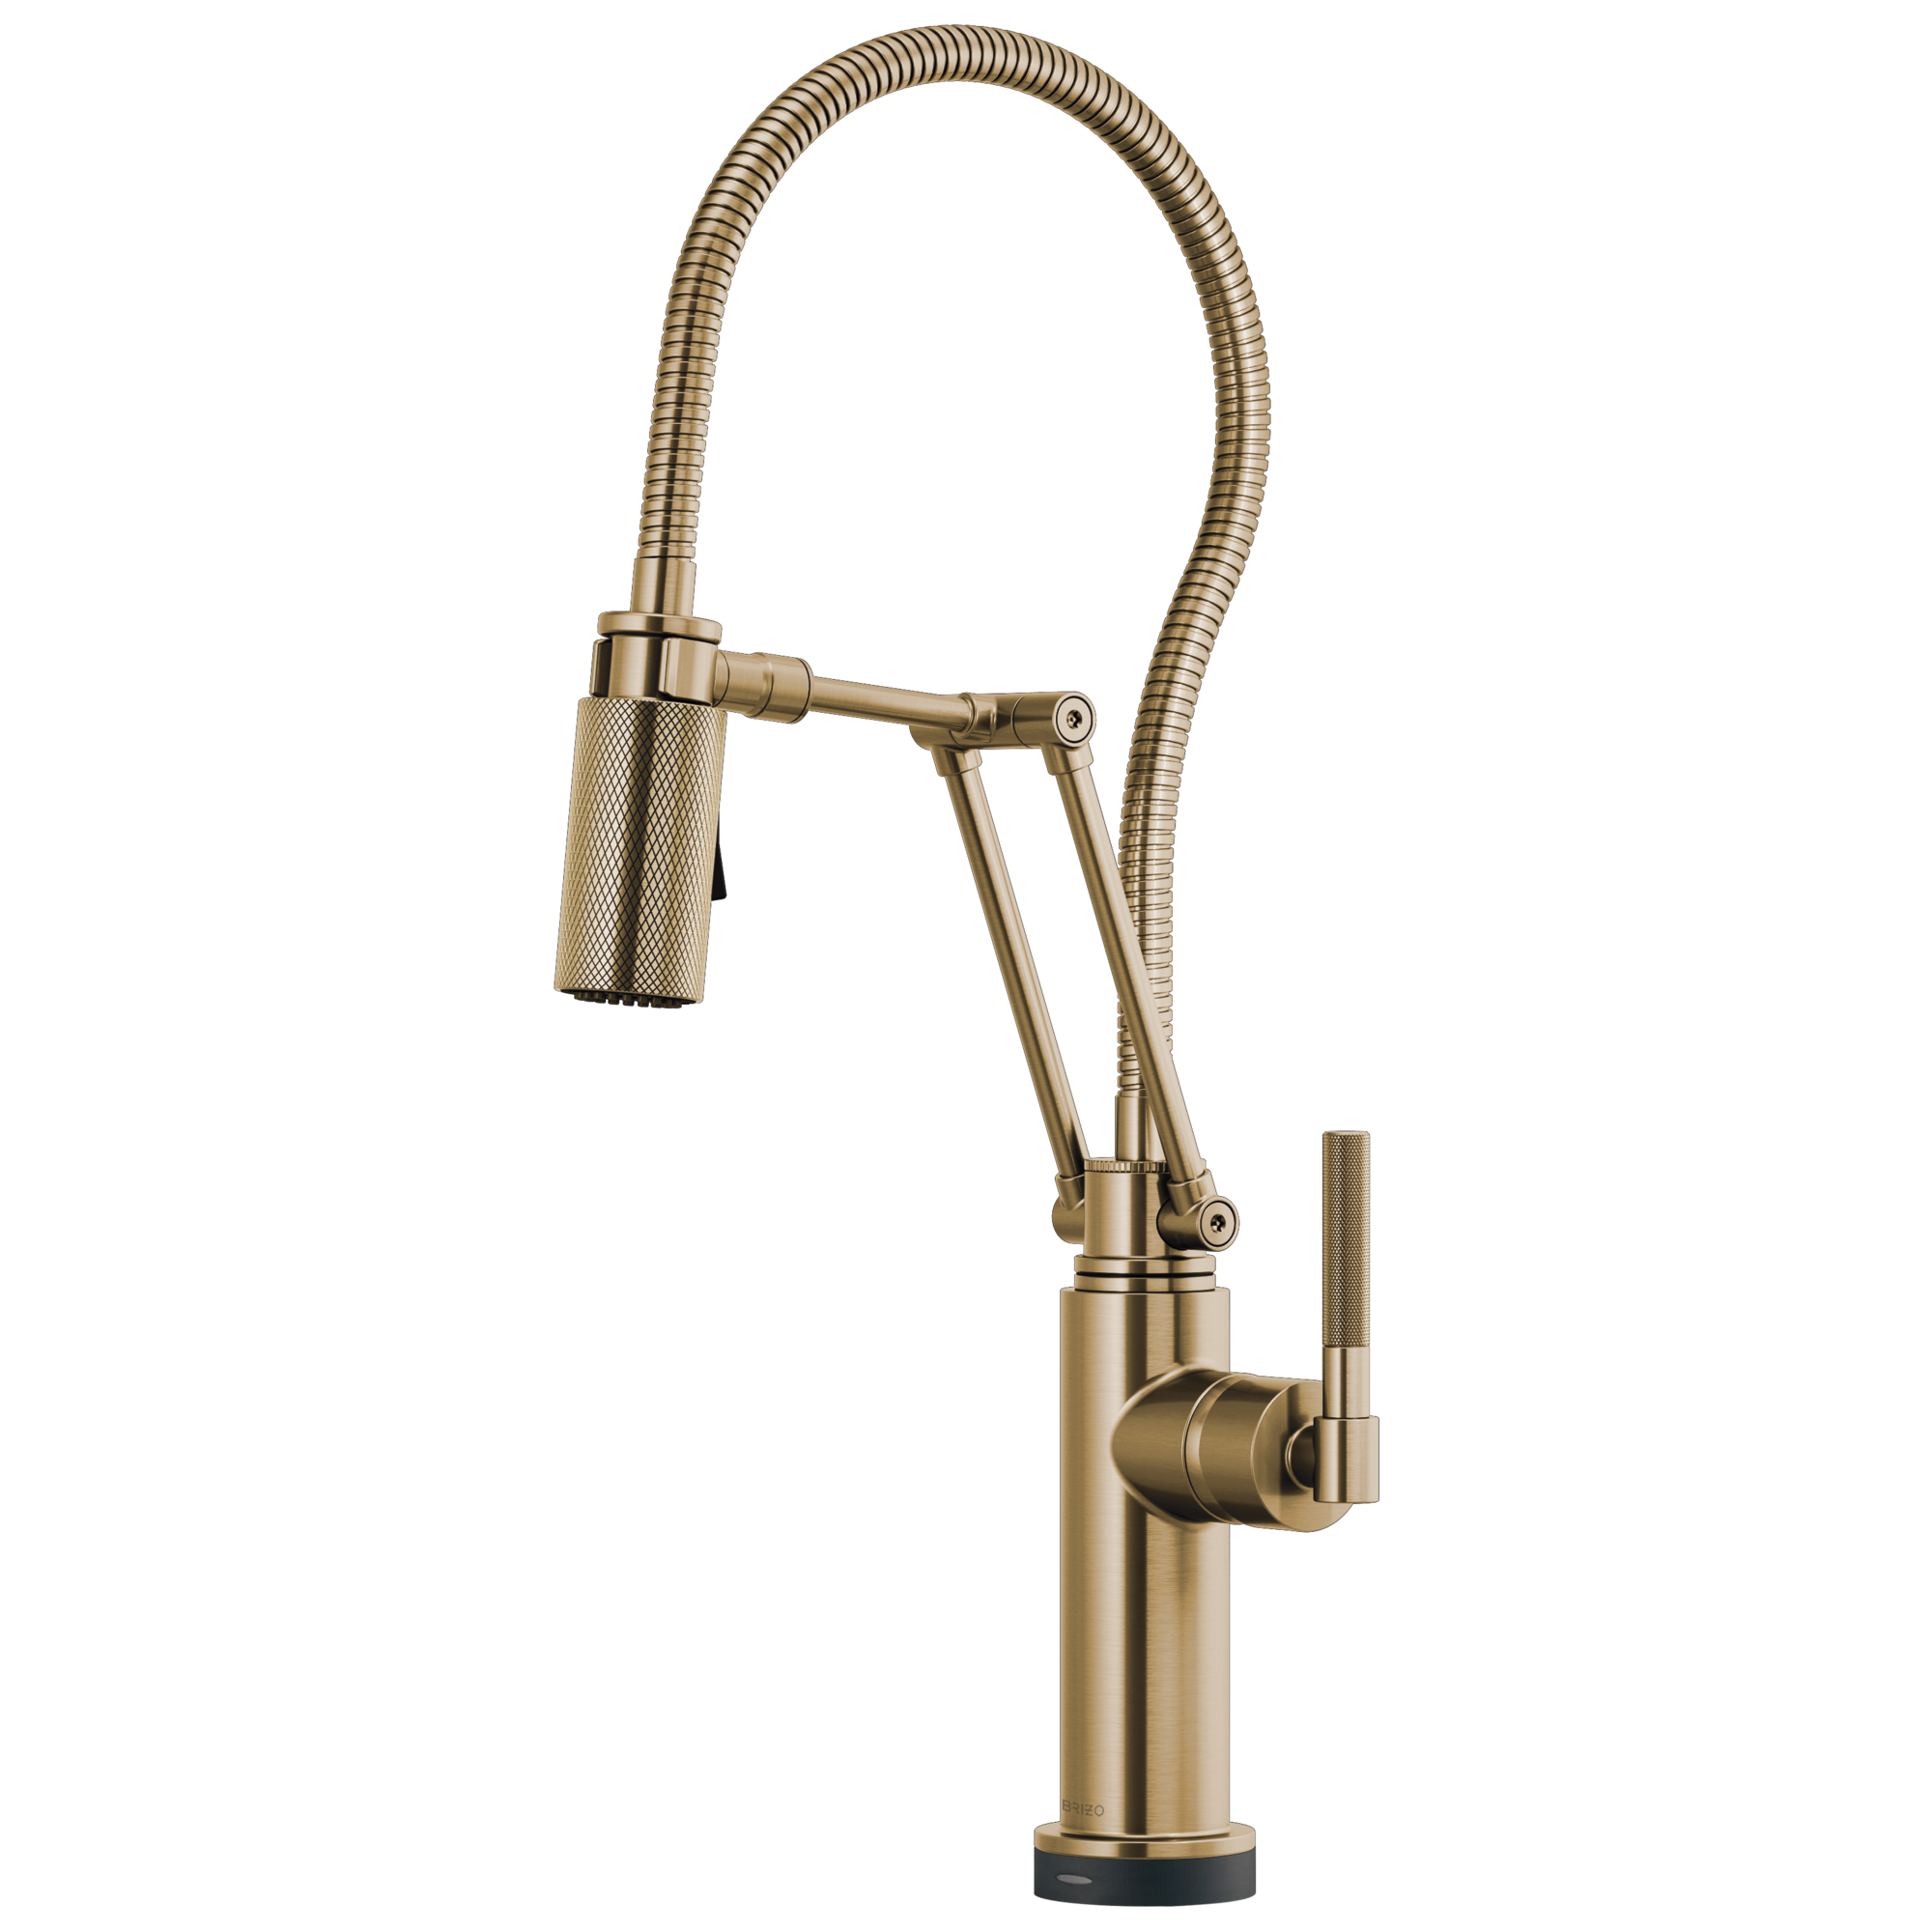 Brizo Litze: SmartTouchArticulating Faucet With Finished Hose